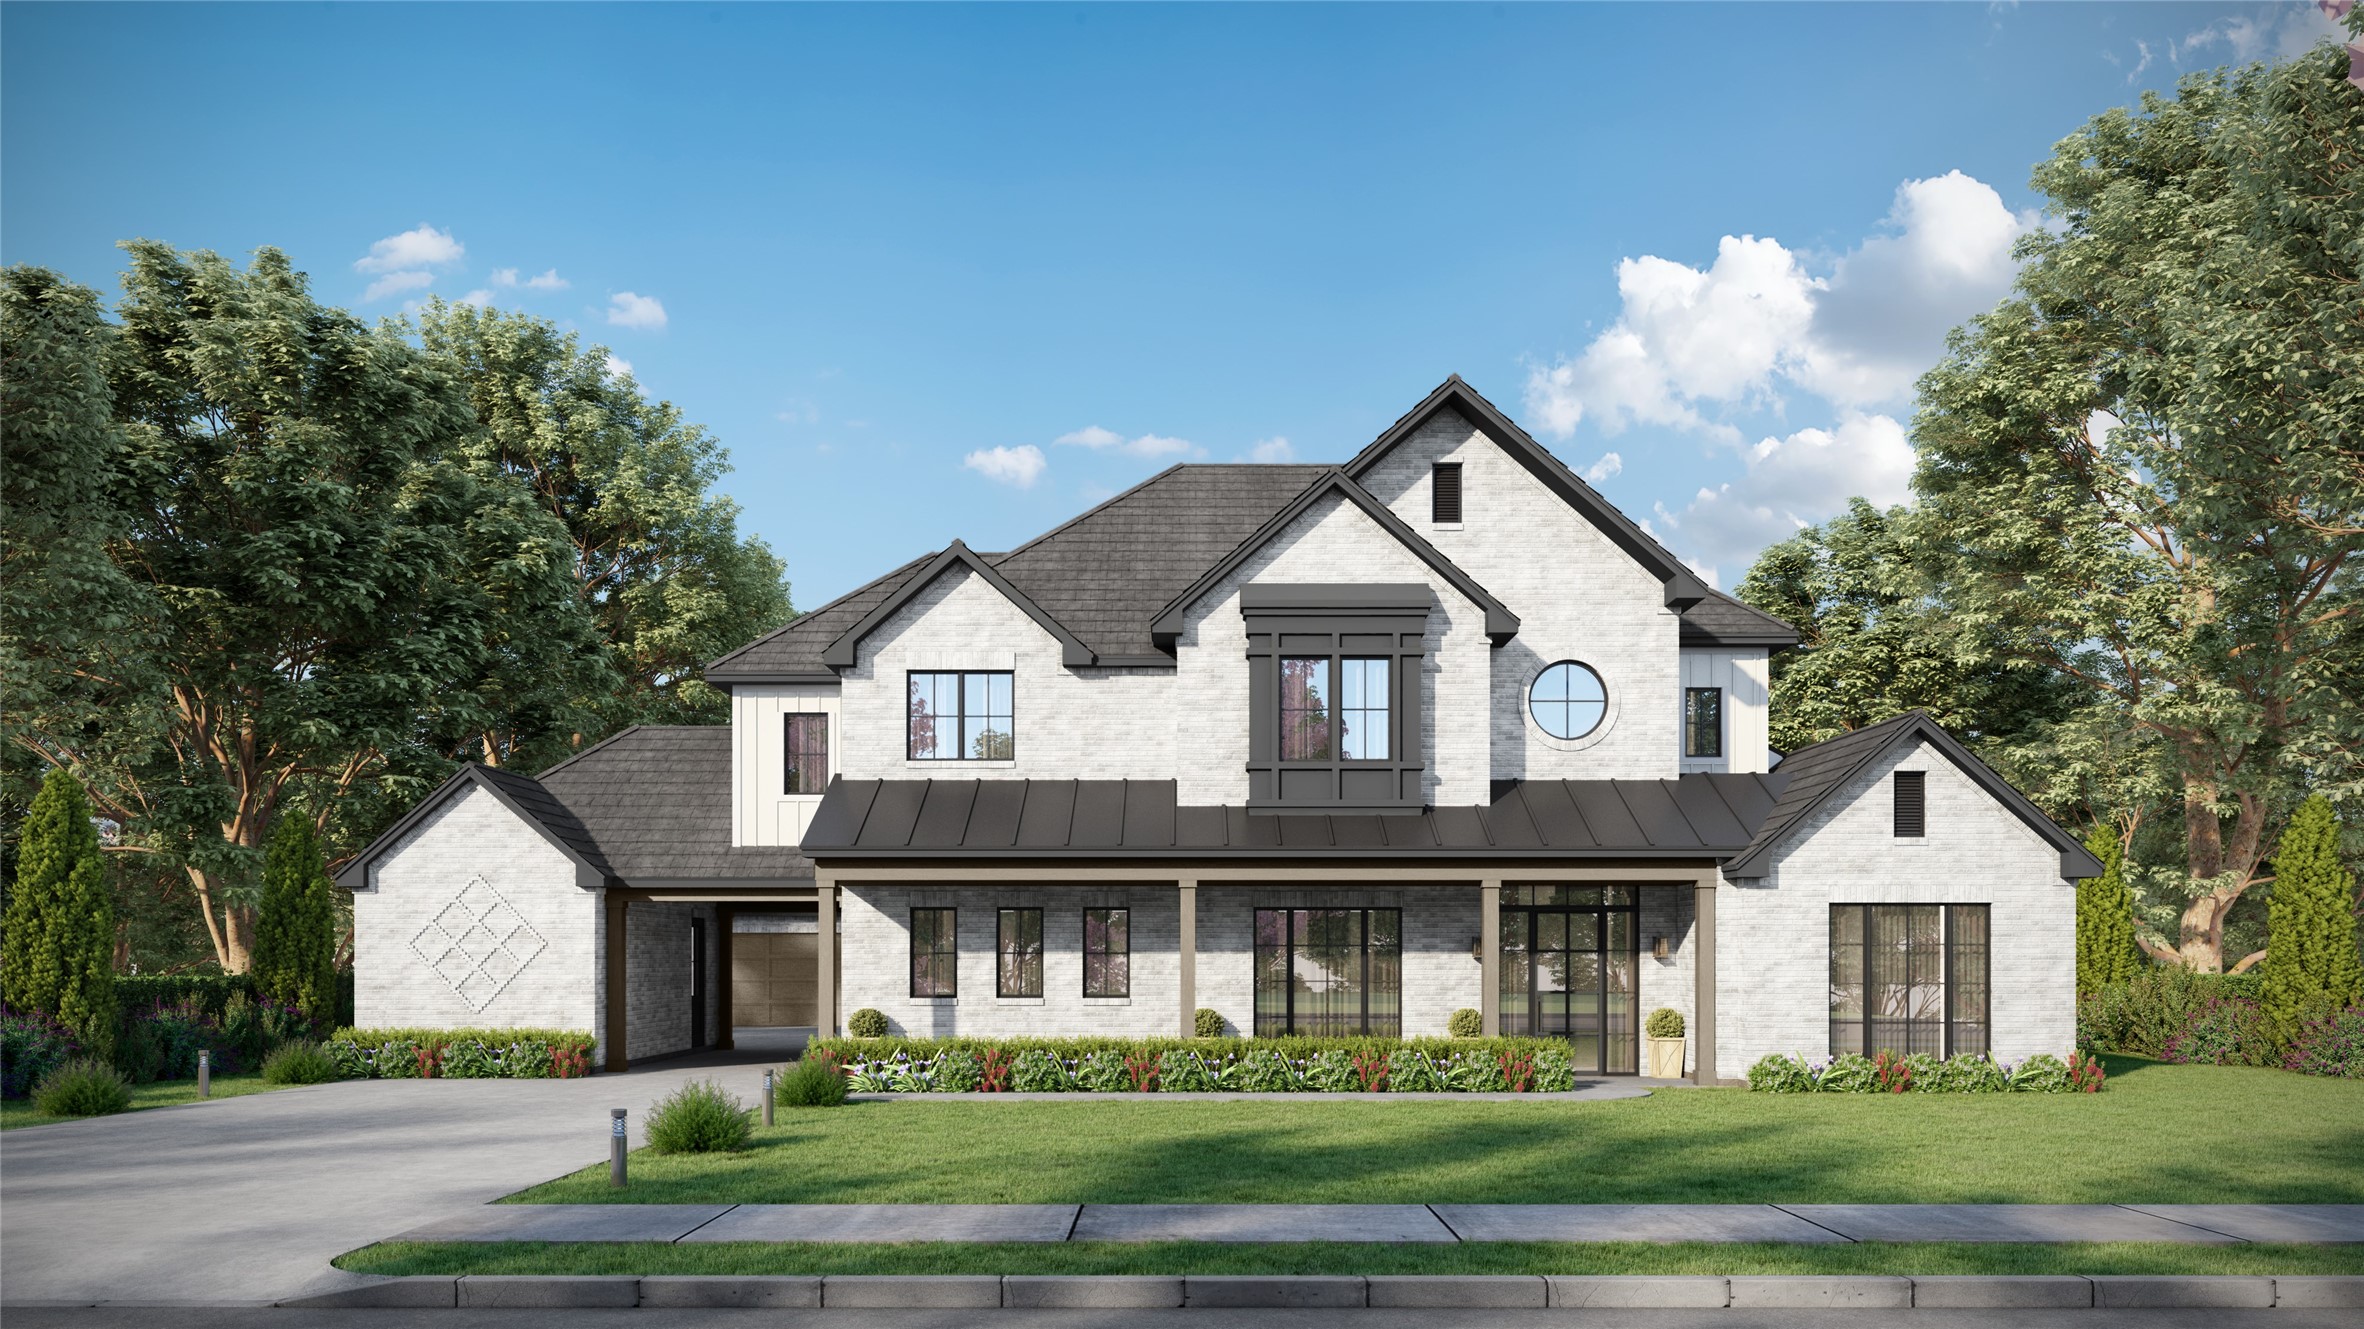 Front elevation of this beautiful home! Construction to begin March 2023! Call Kim Perdomo for more information.